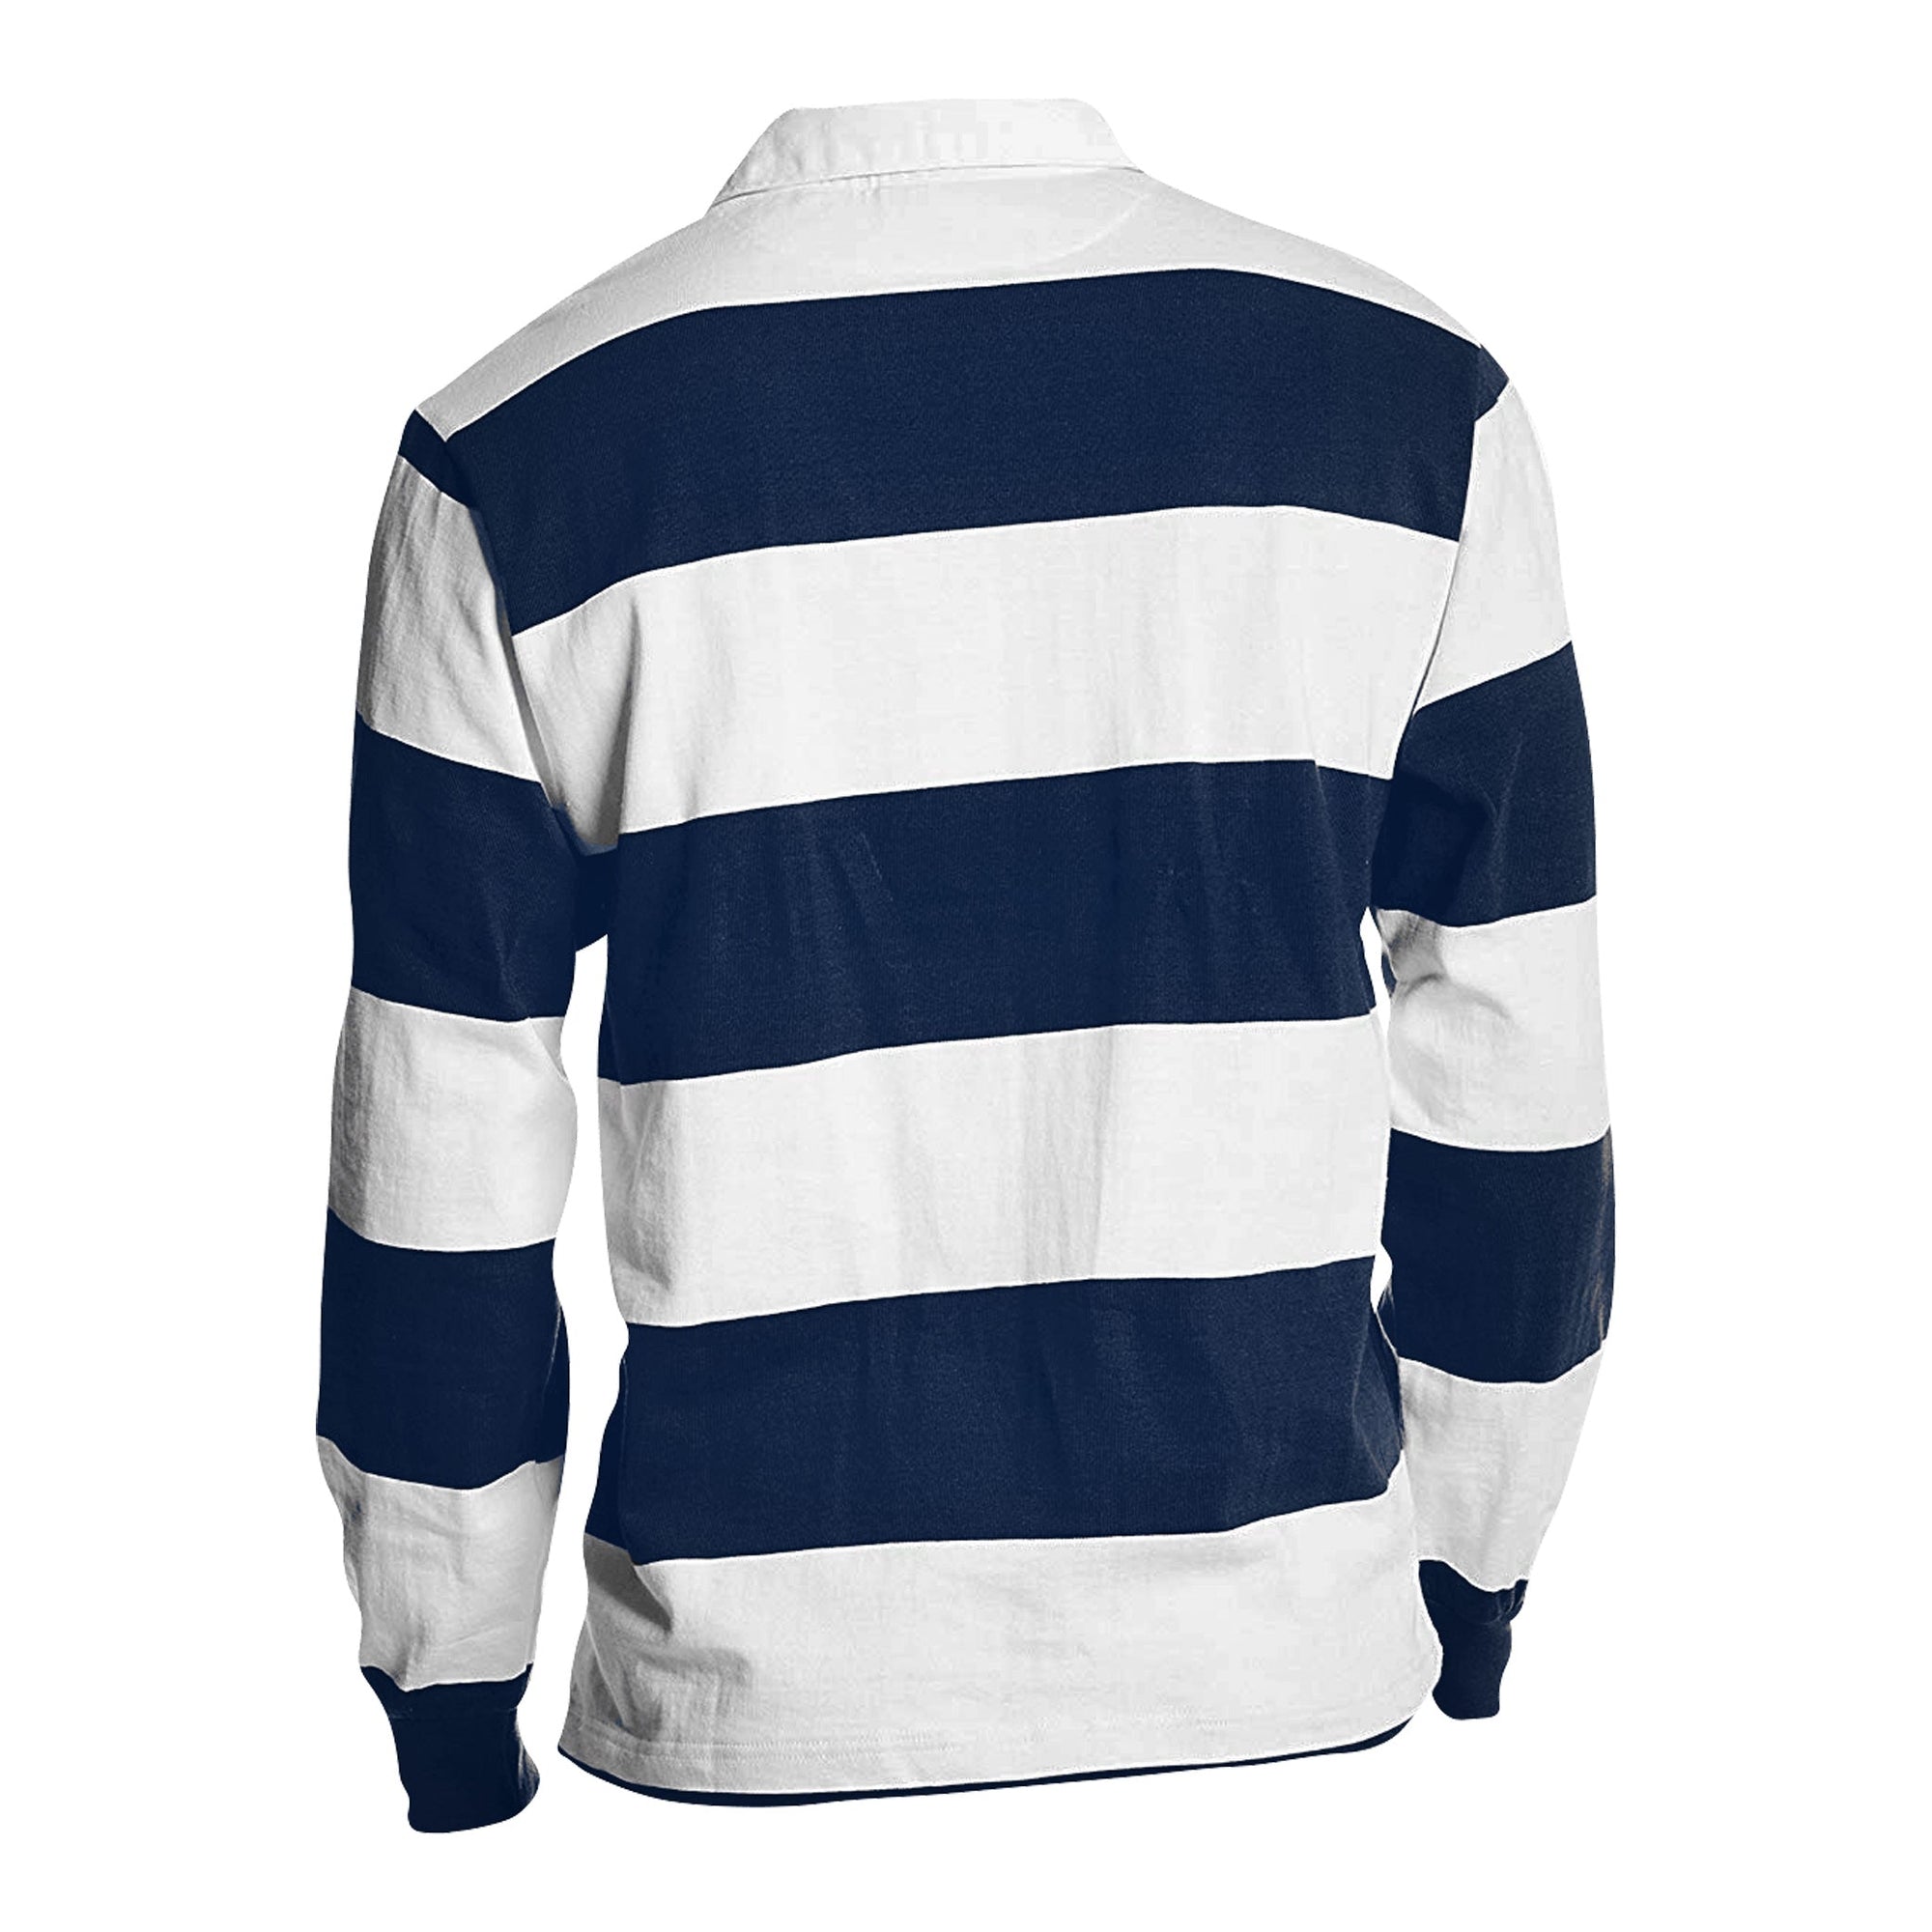 Rugby Imports Triad RFC Cotton Social Jersey